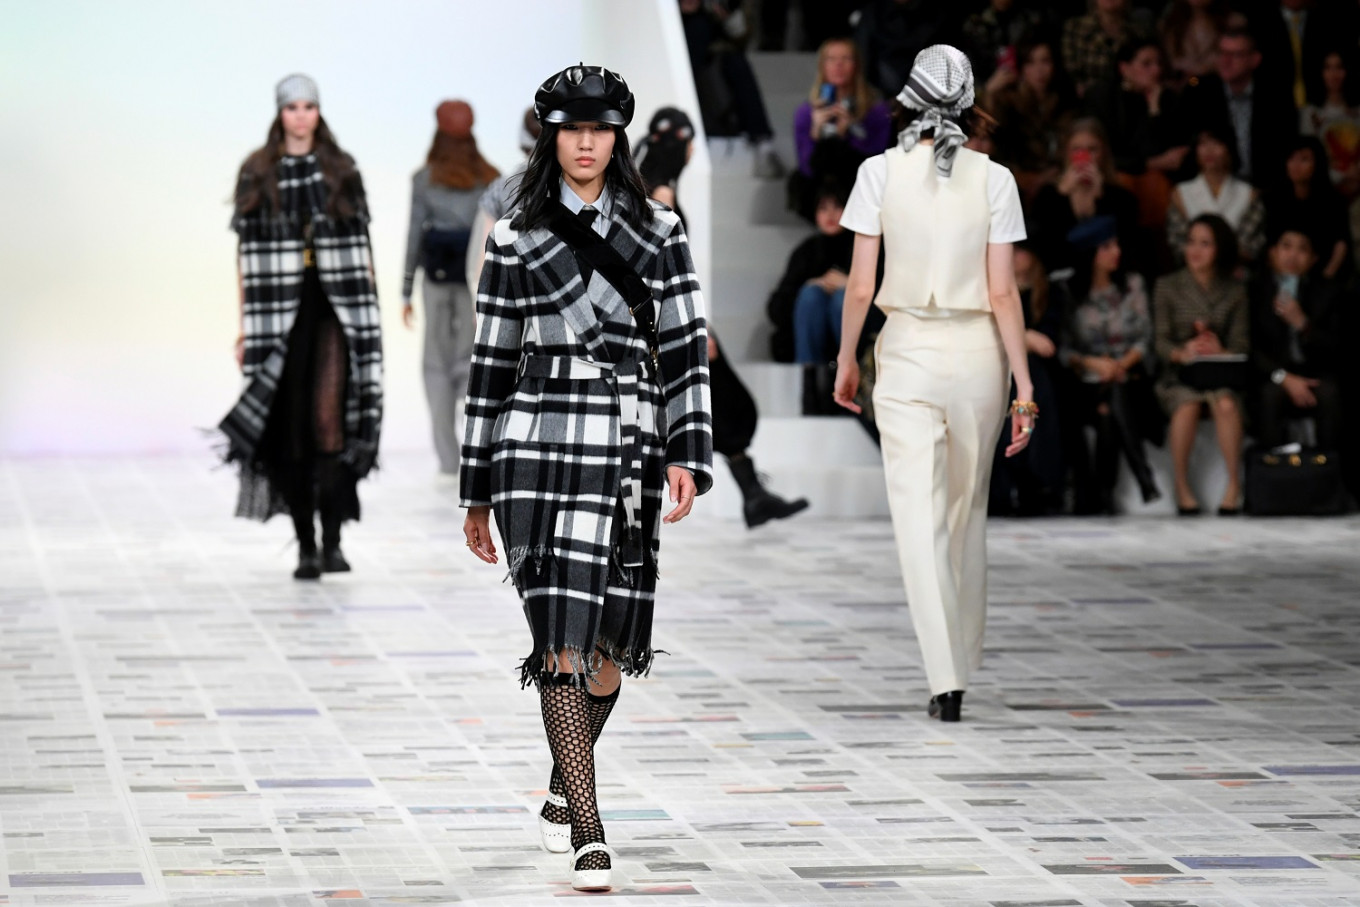 Dior plays with 1970s influences at Paris Fashion Week